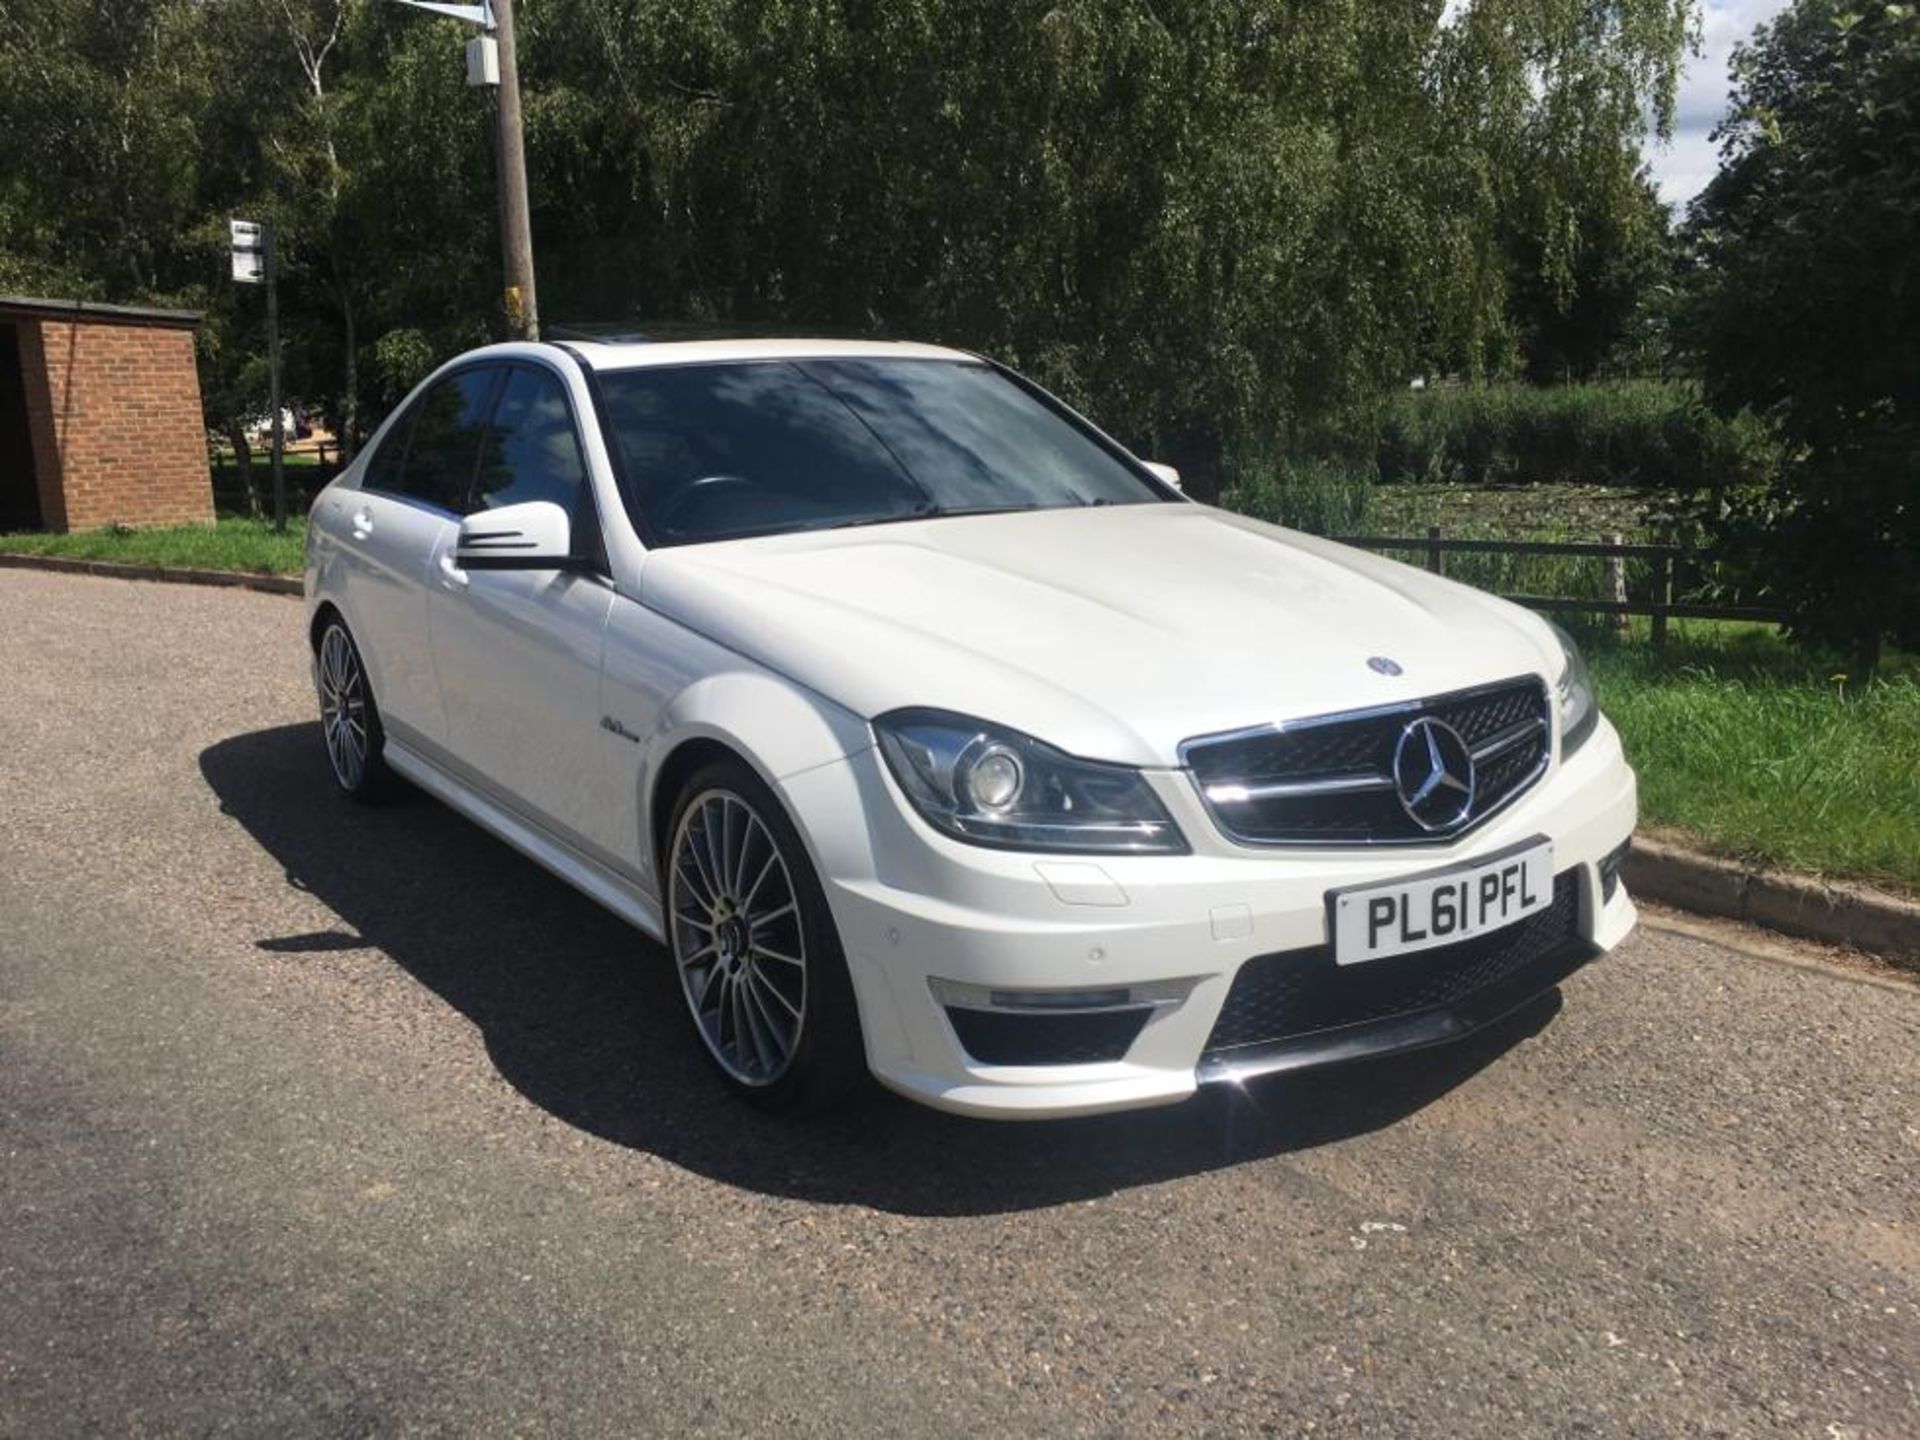 2011 MERCEDES BENZ C63 AMG EDITION 125 AUTO **MERCEDES BENZ SERVICE HISTORY** - Image 2 of 38